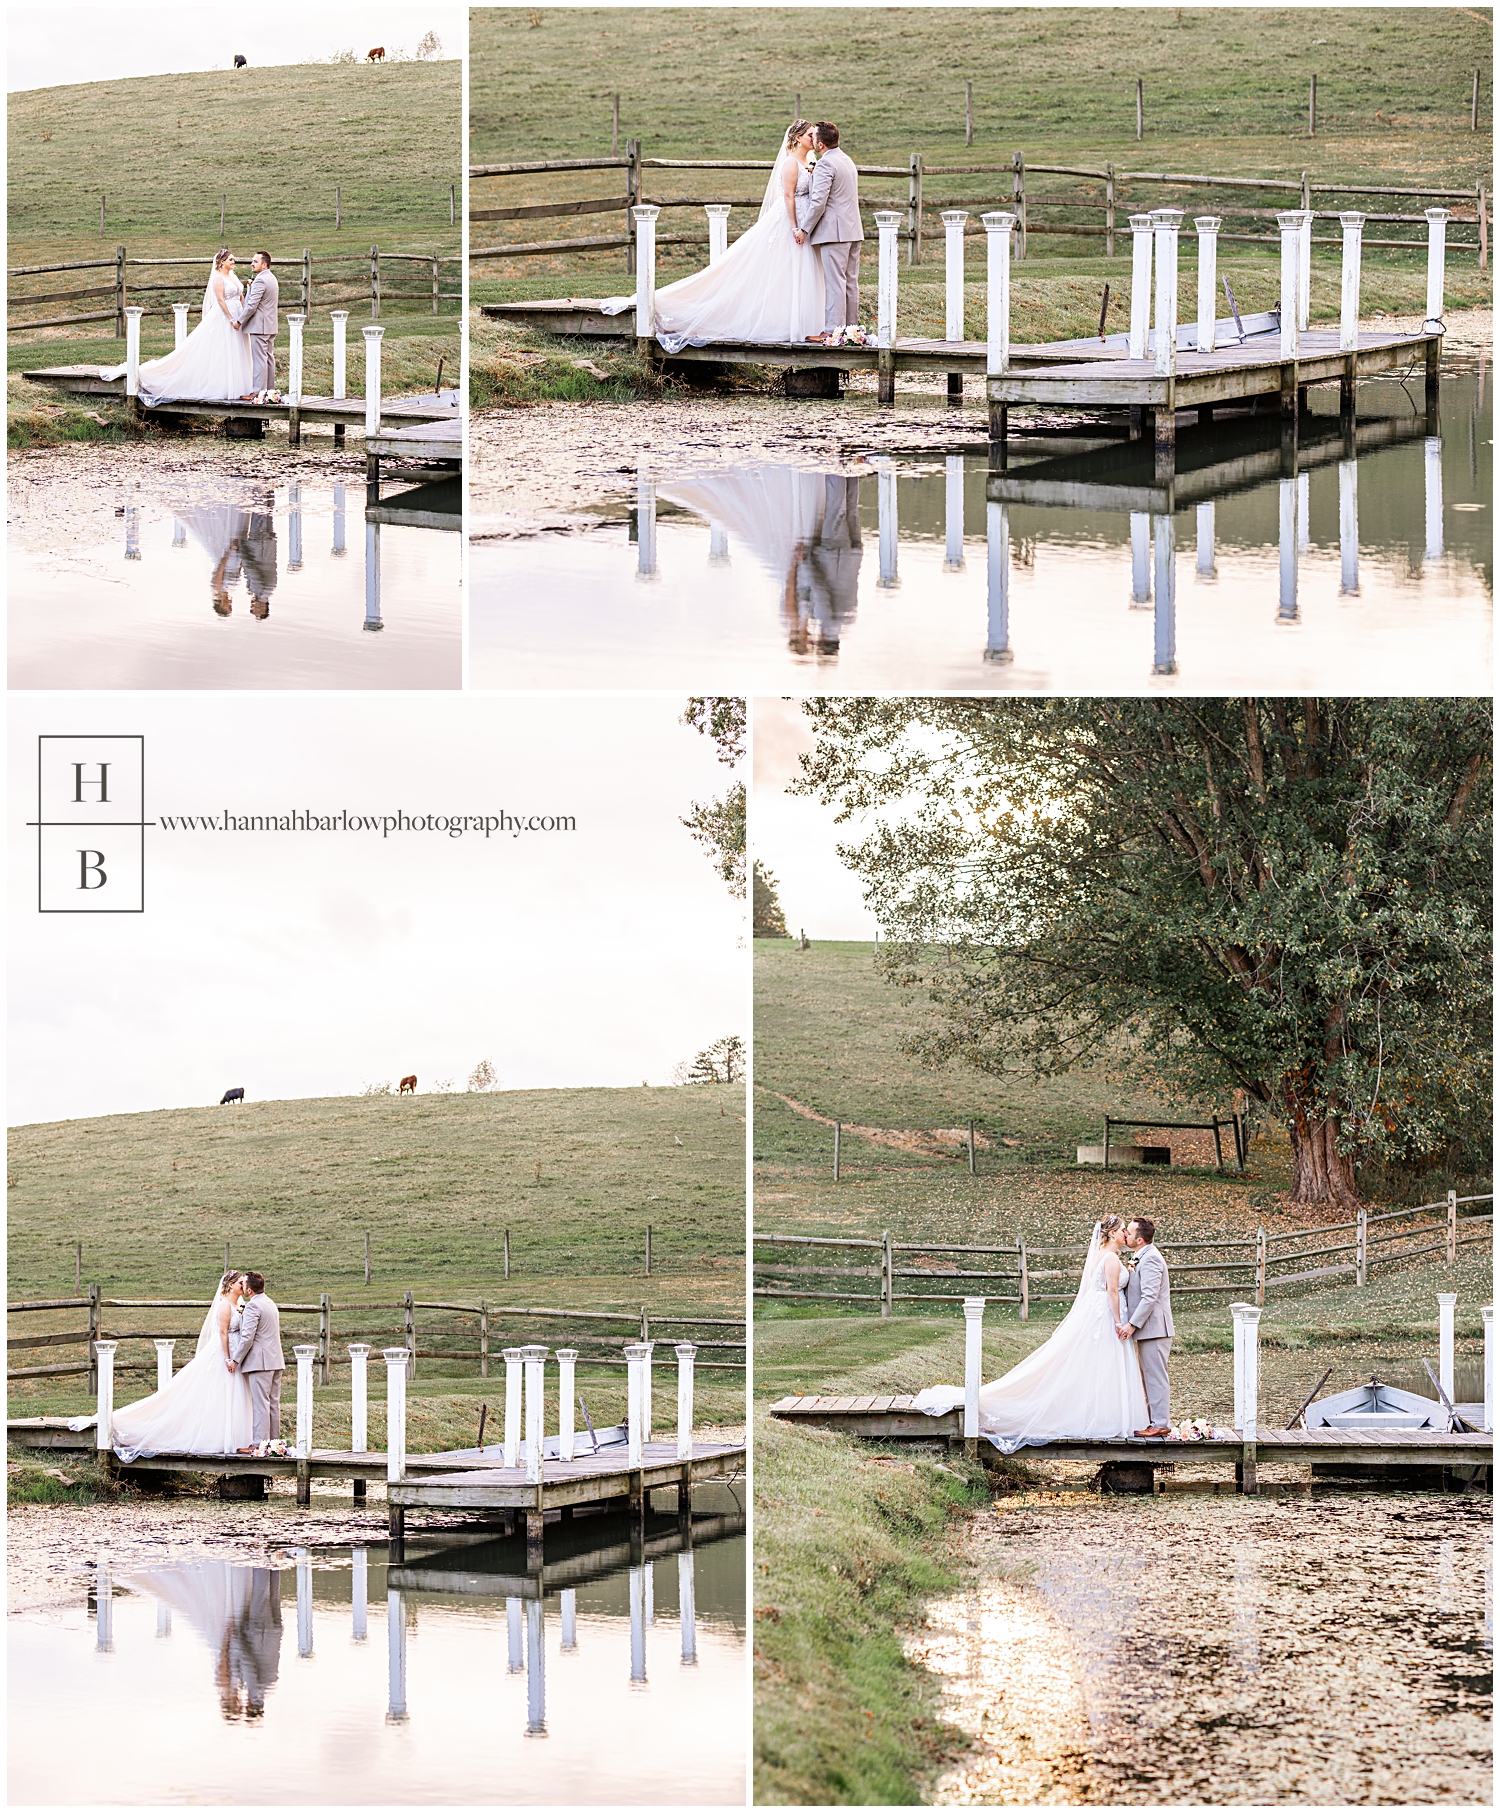 Bride and groom stand on dock for wedding photos with reflection in lake.